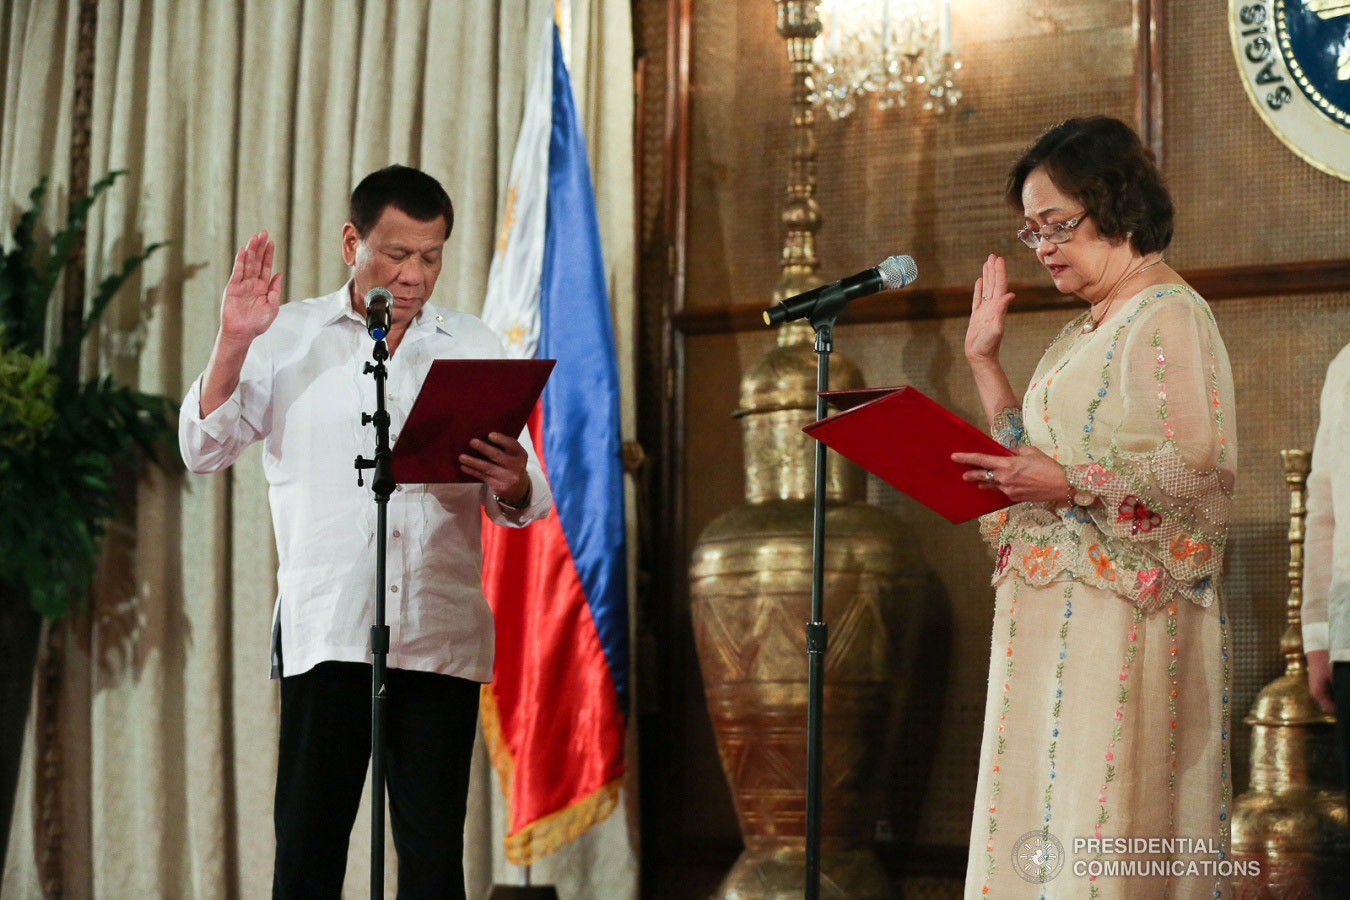 President Rodrigo Roa Duterte administers the oath of newly-appointed Supreme Court Chief Justice Teresita Leonardo-De Castro during a ceremony held at the Malacañan Palace on August 31, 2018. SIMEON CELI JR./PRESIDENTIAL PHOTO